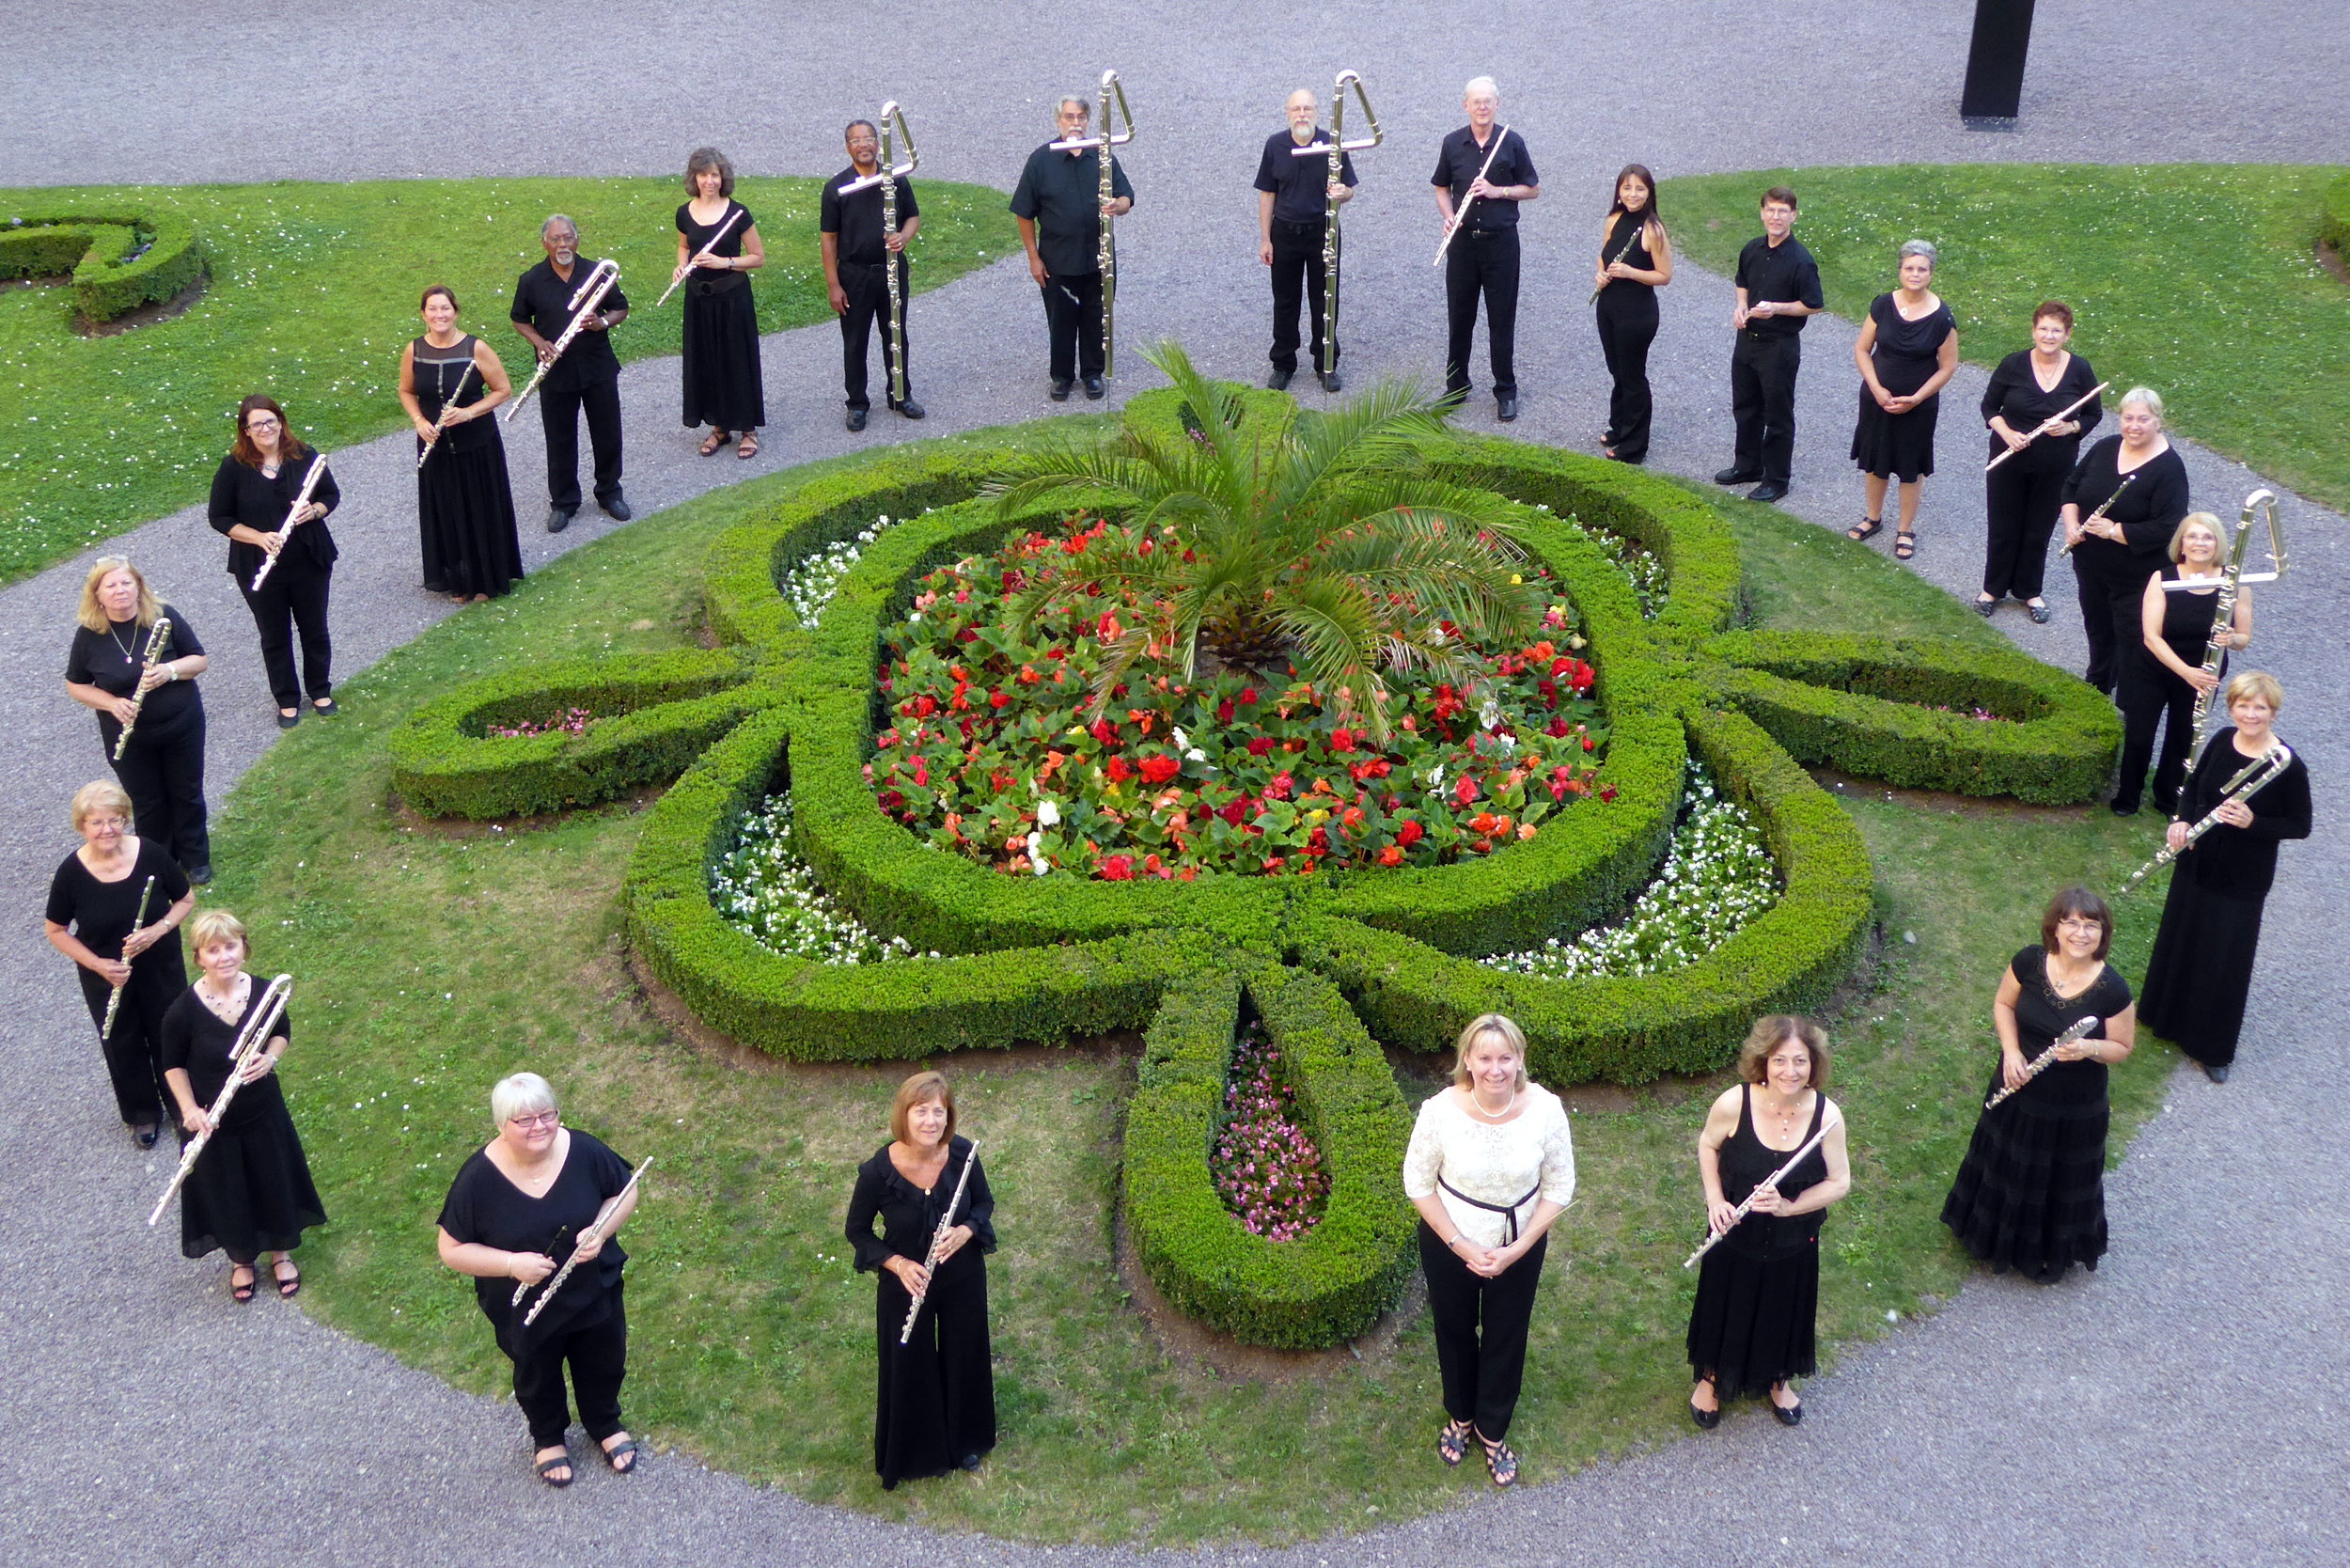 Metropolitan Flute Orchestra in one of the gardens of the Palace of the Archbishop's in Kromeriz, Czech Republic